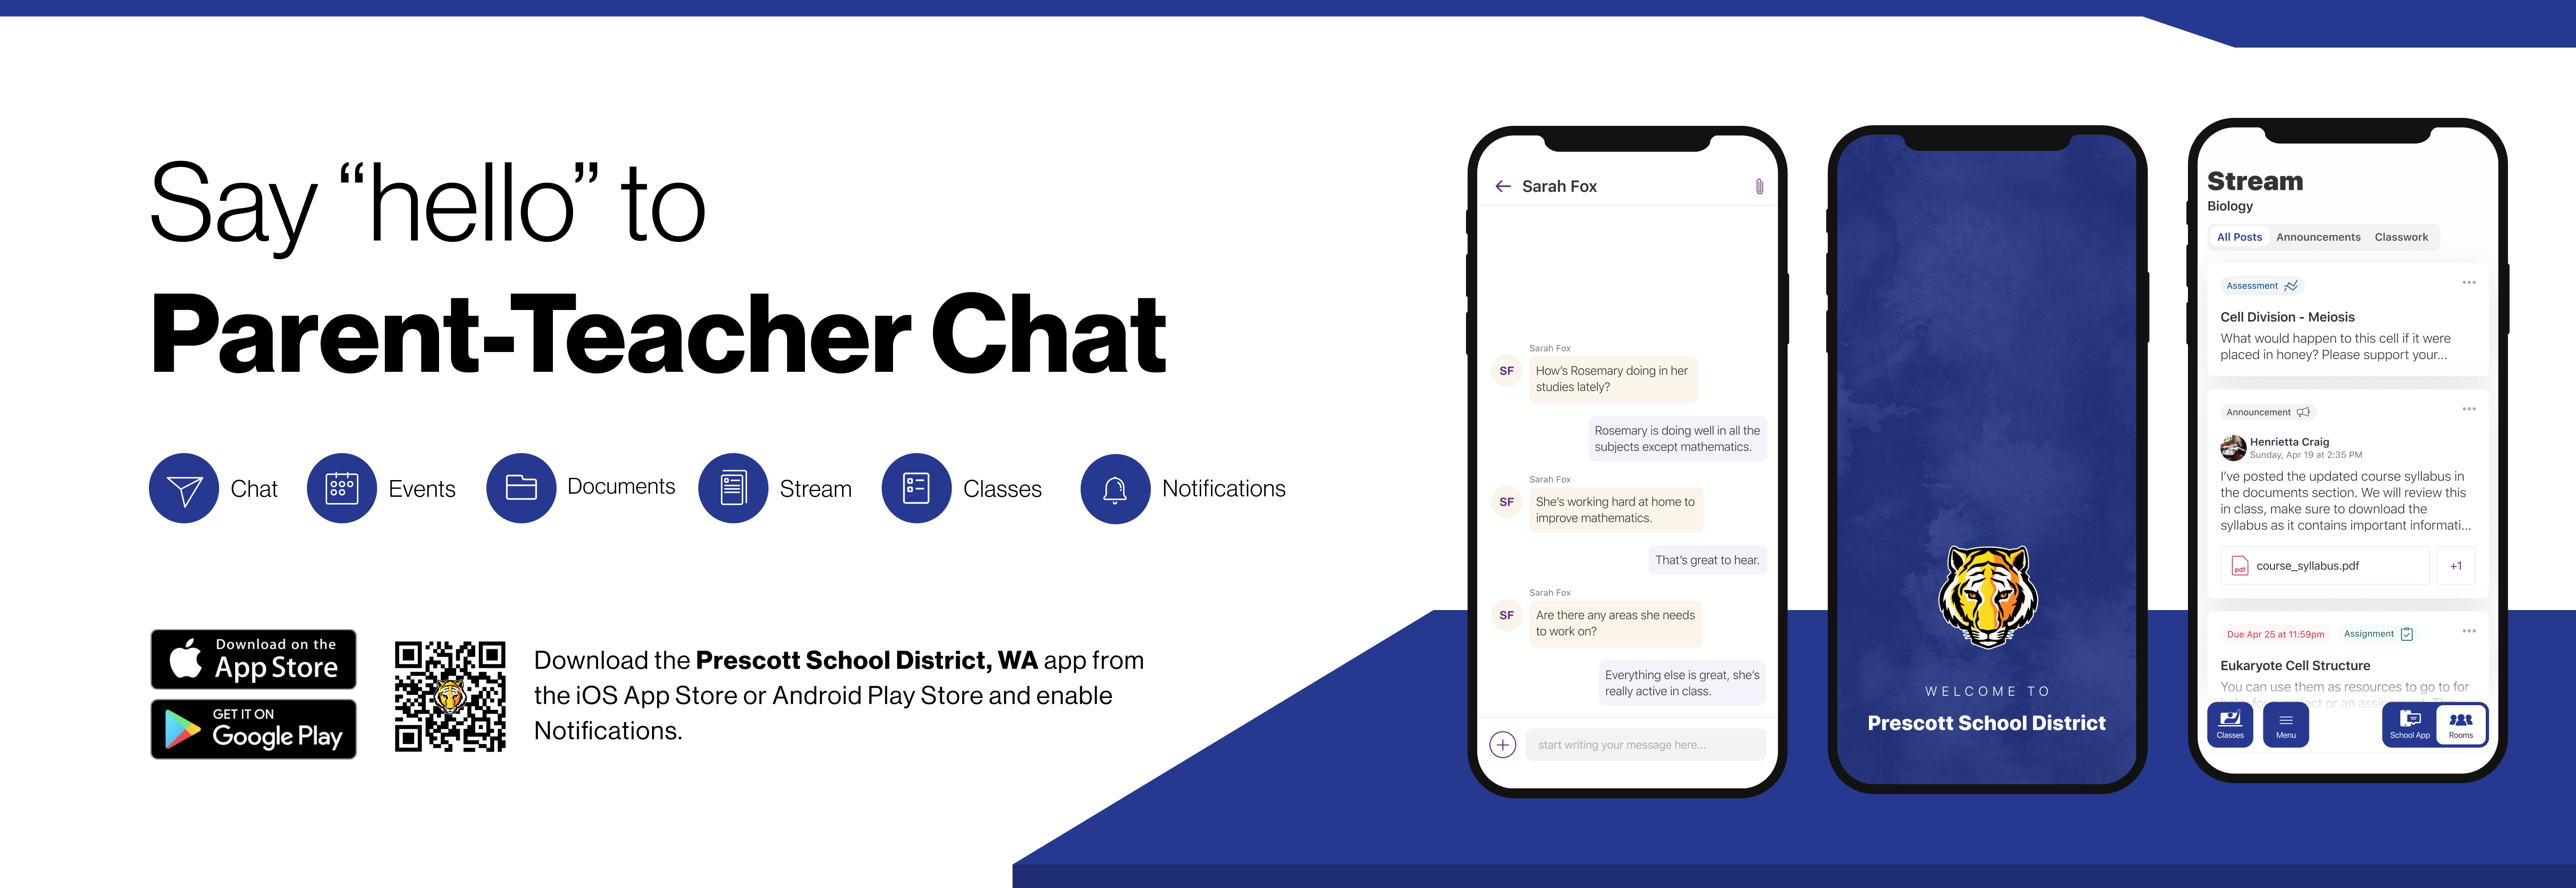 Say hello to parent-teacher chat on our current district mobile app